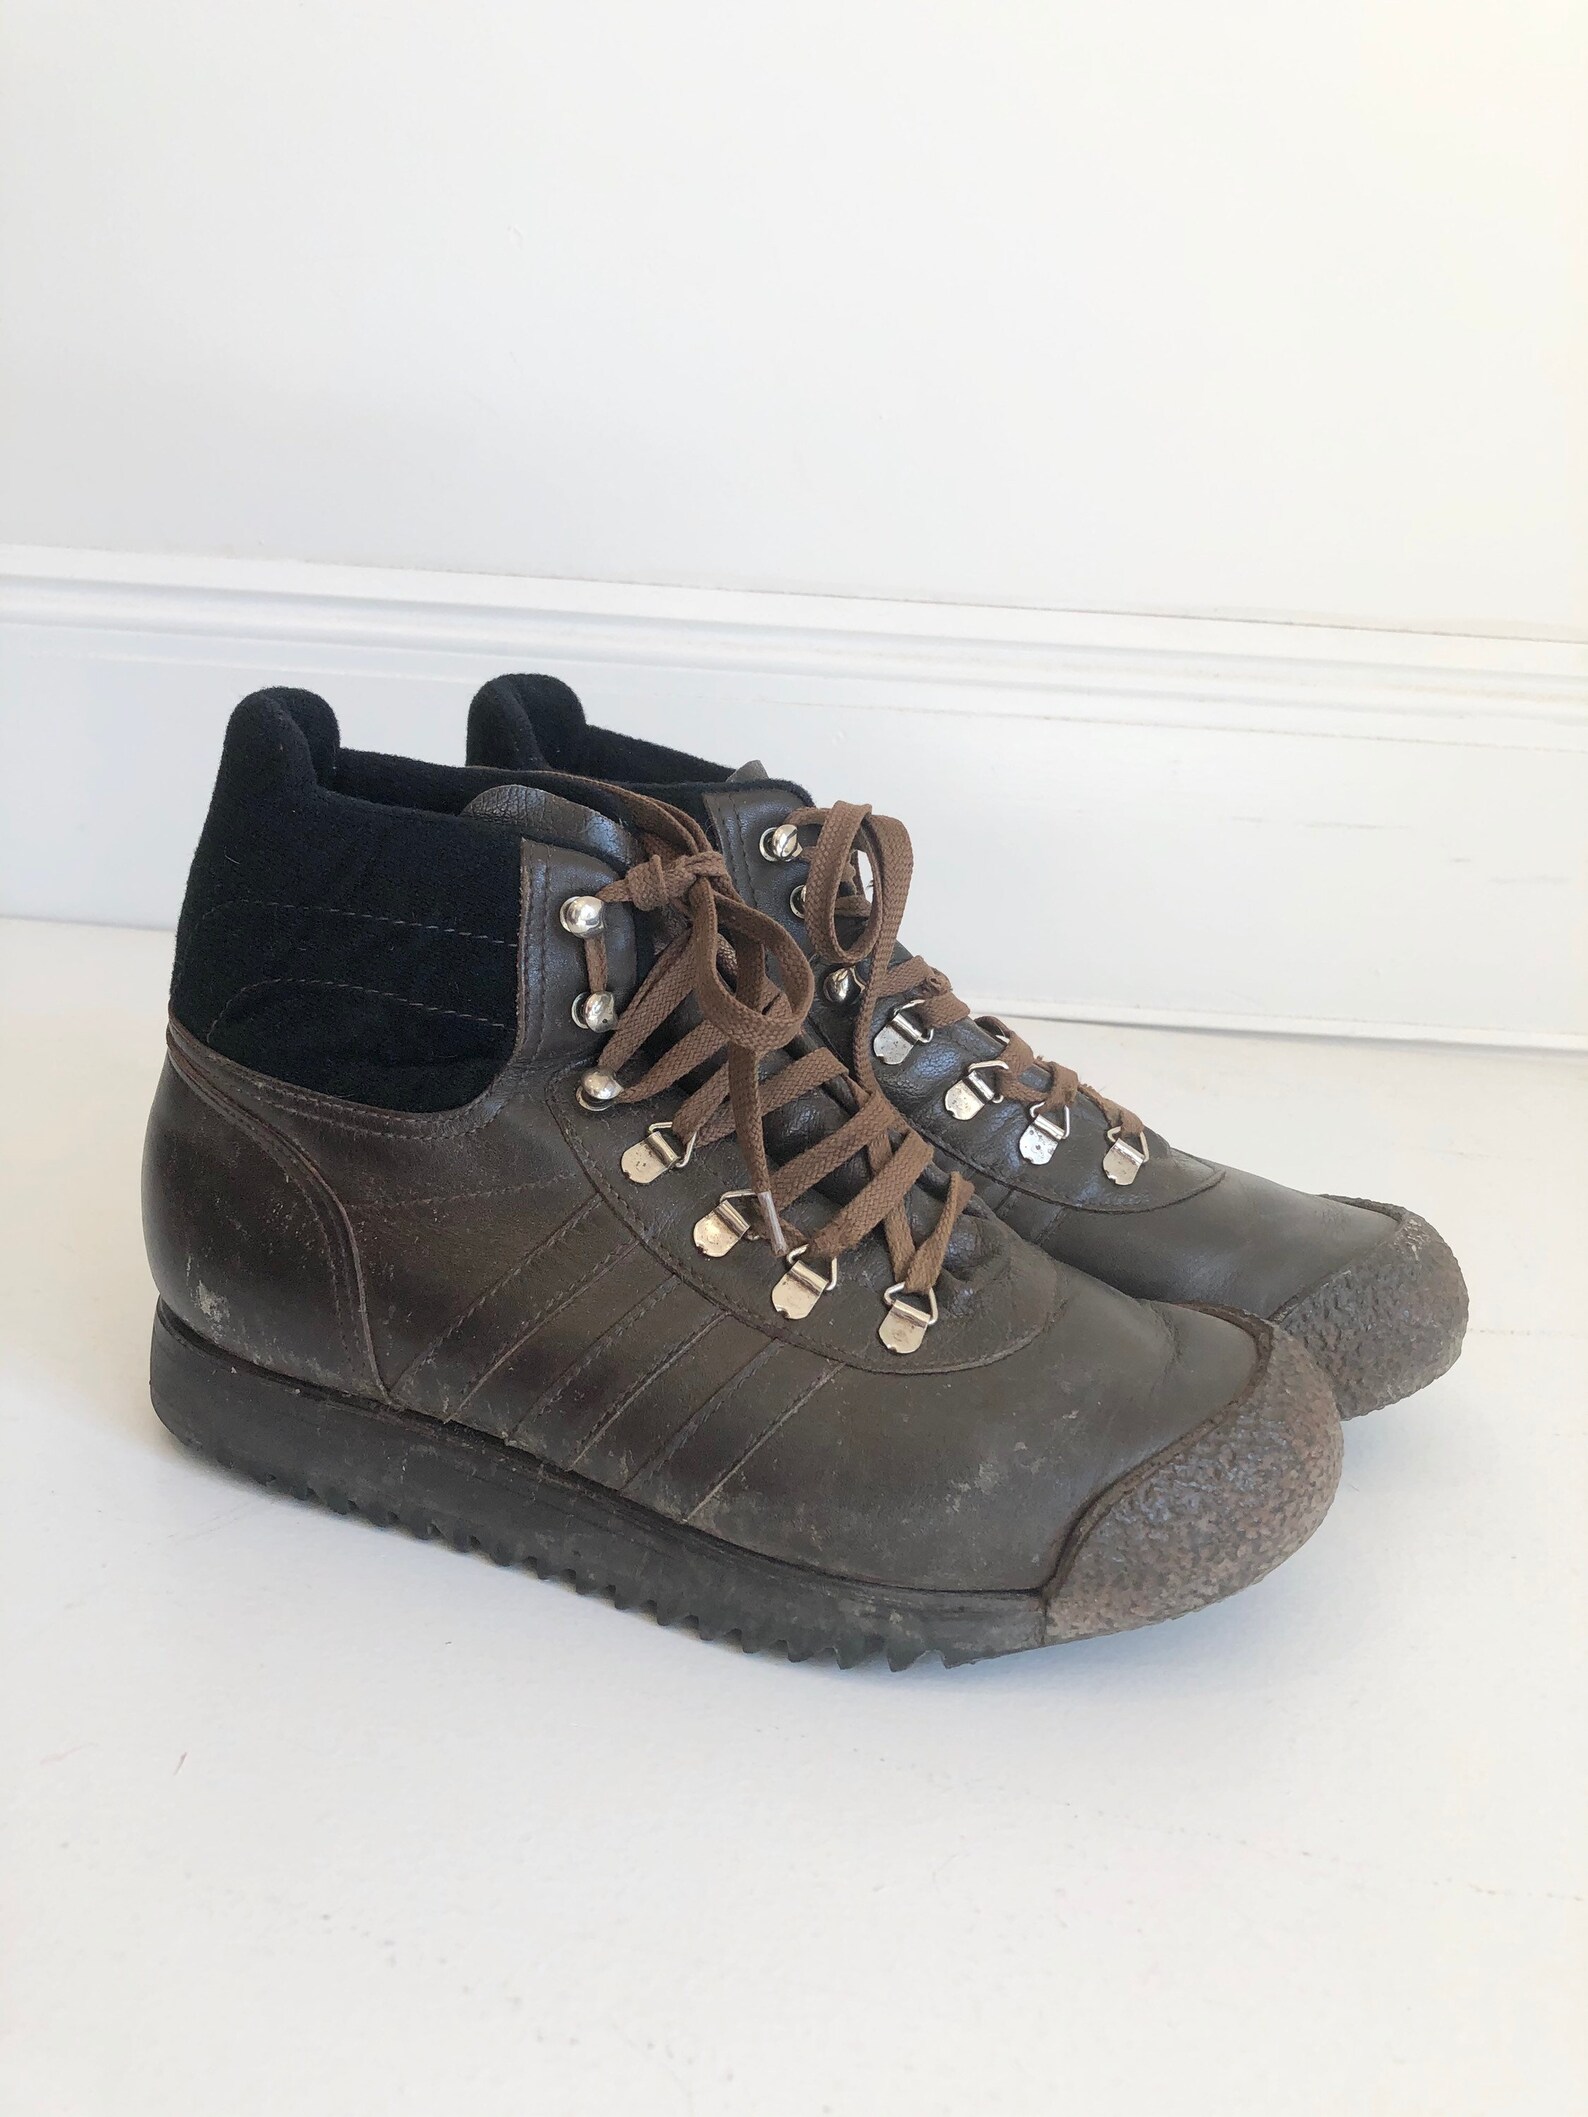 AMAZING 1970s Adidas Brown Leather Hiking Boots 7.5 9 - Etsy